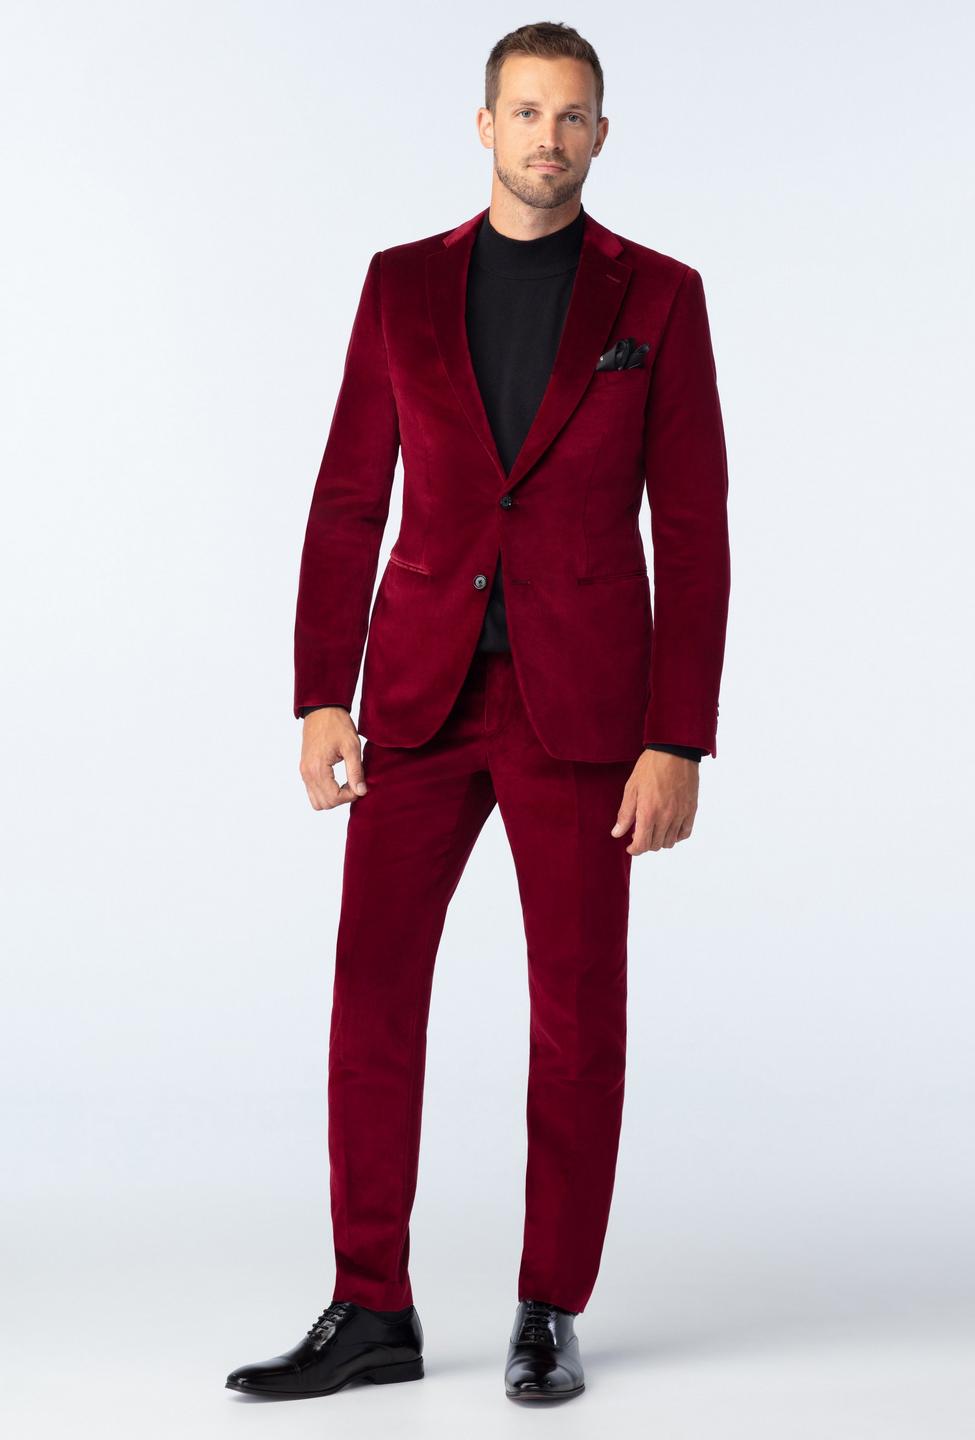 Burgundy suit - Harford Solid Design from Premium Indochino Collection